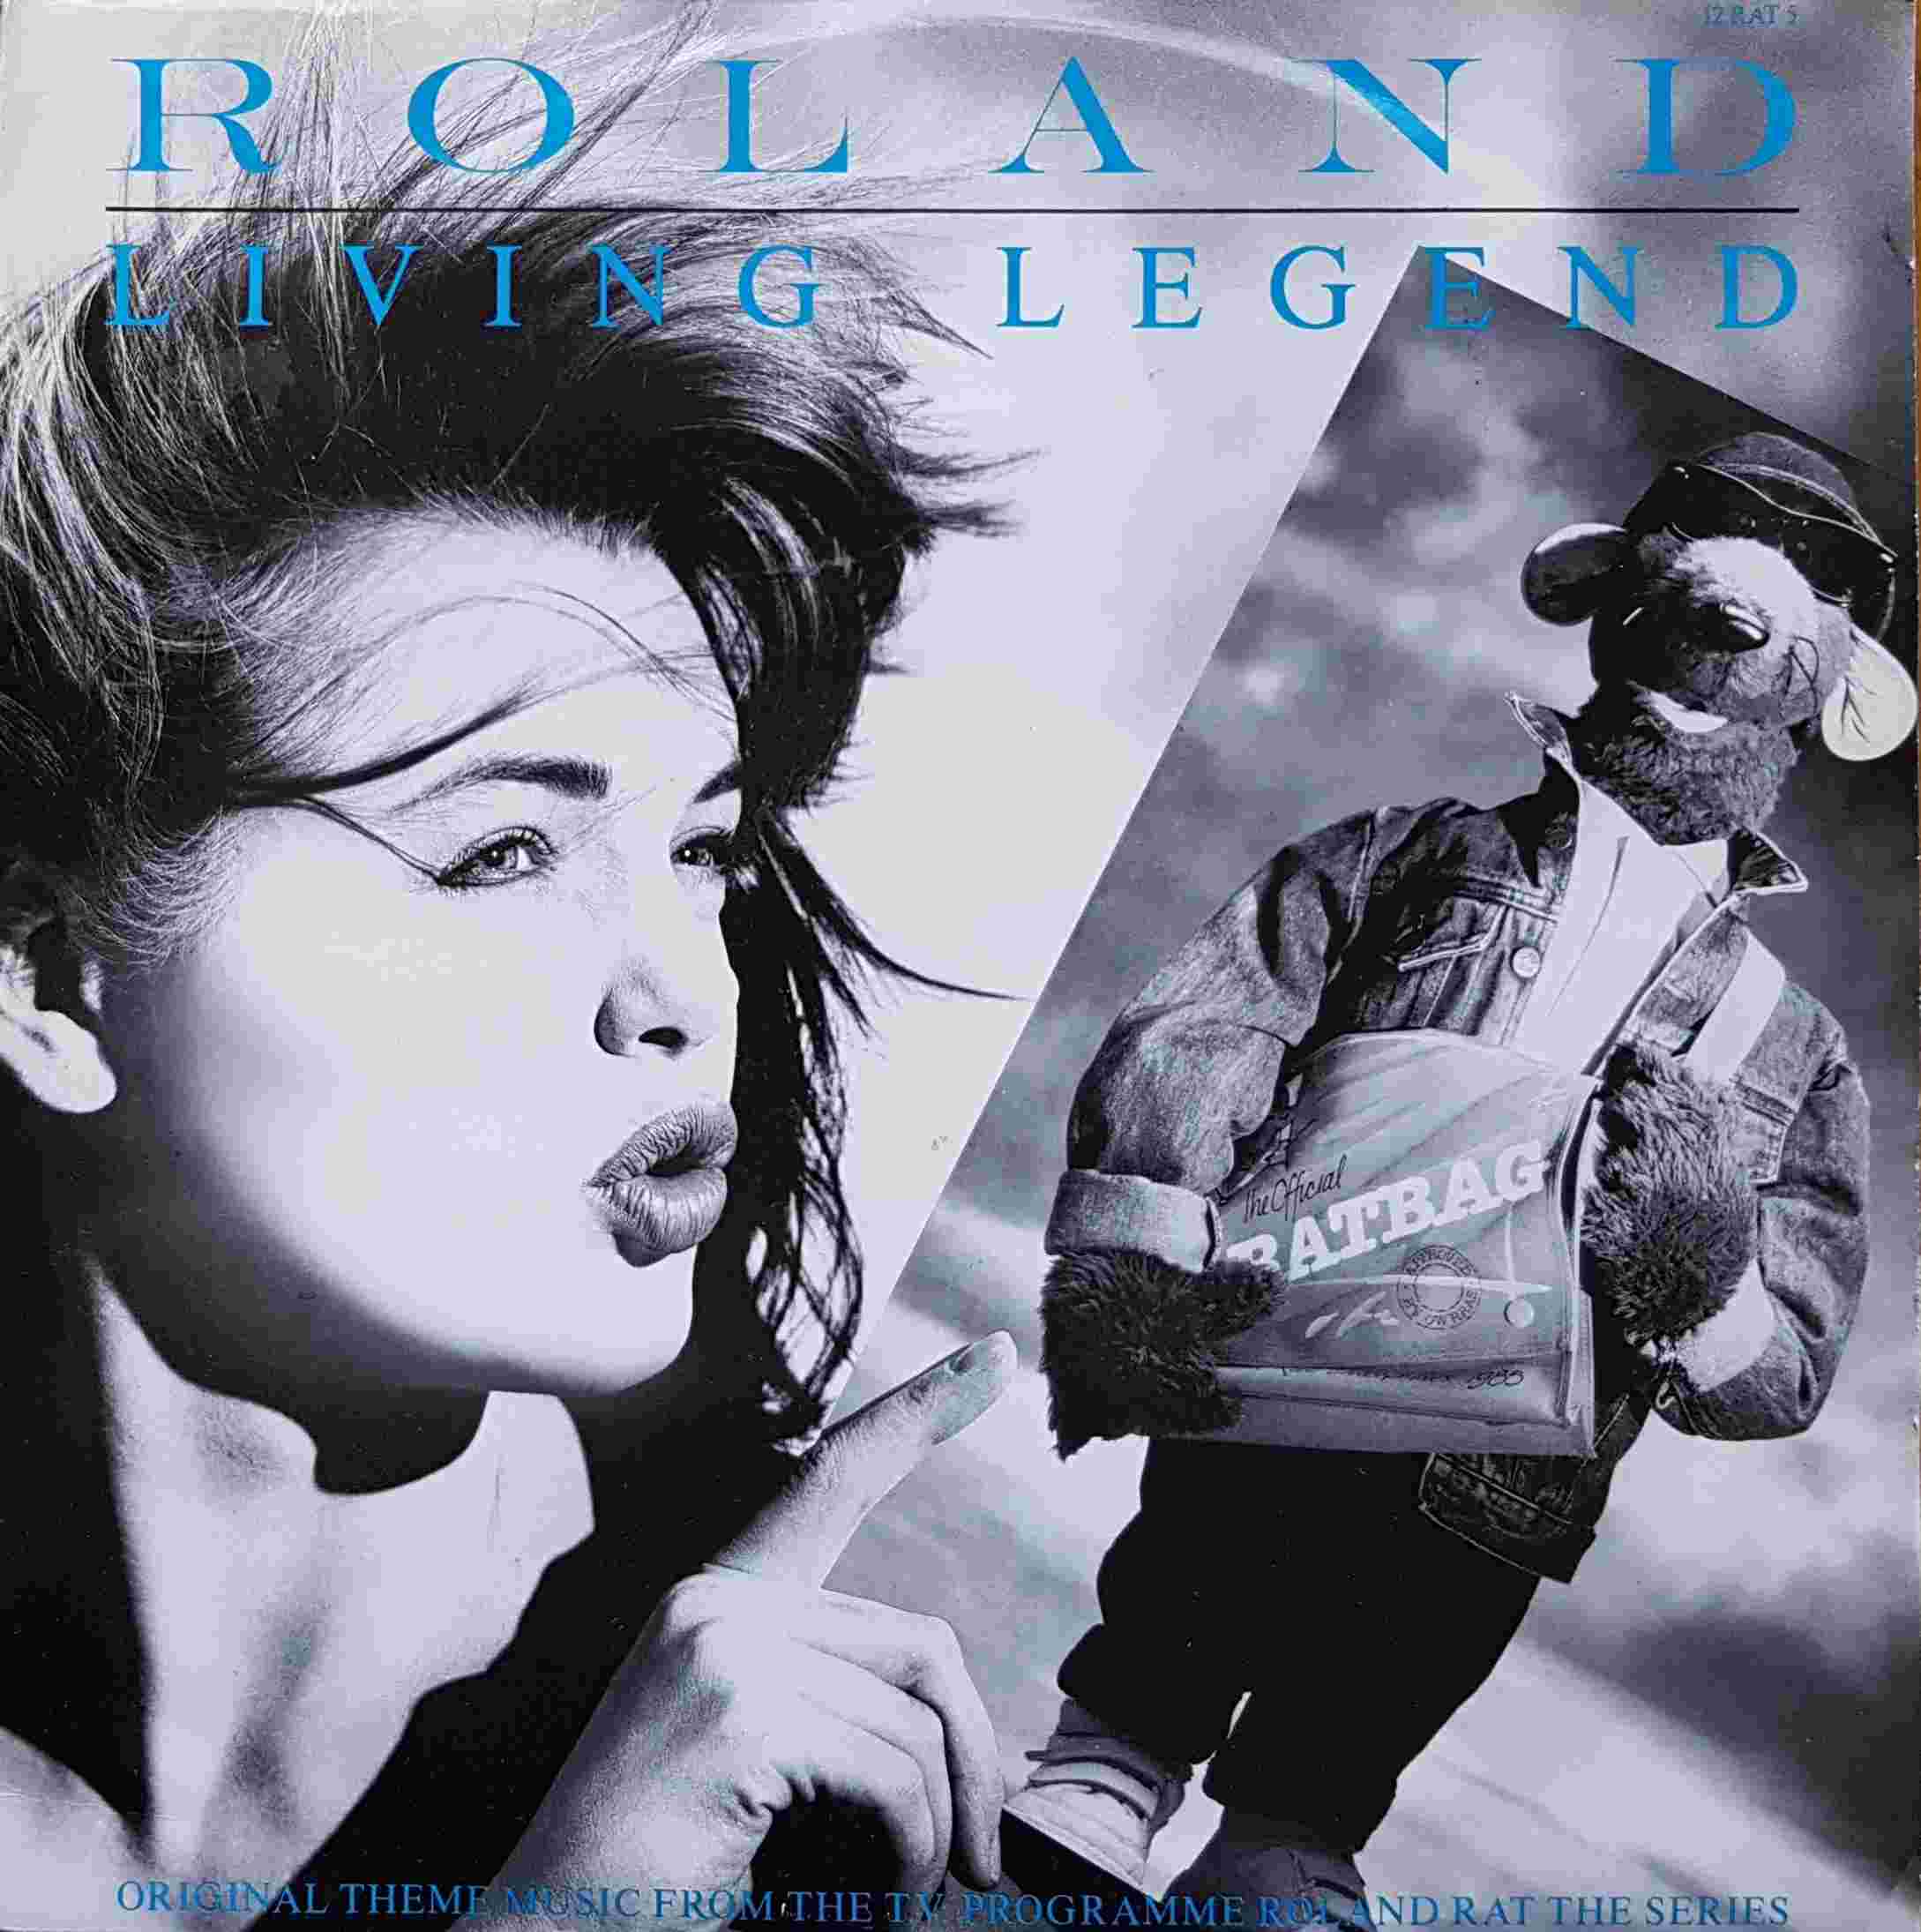 Picture of Living legend (Roland Rat - the series) by artist Roland Rat / S. Brint / Stock / AitKen / Waterman from the BBC 12inches - Records and Tapes library